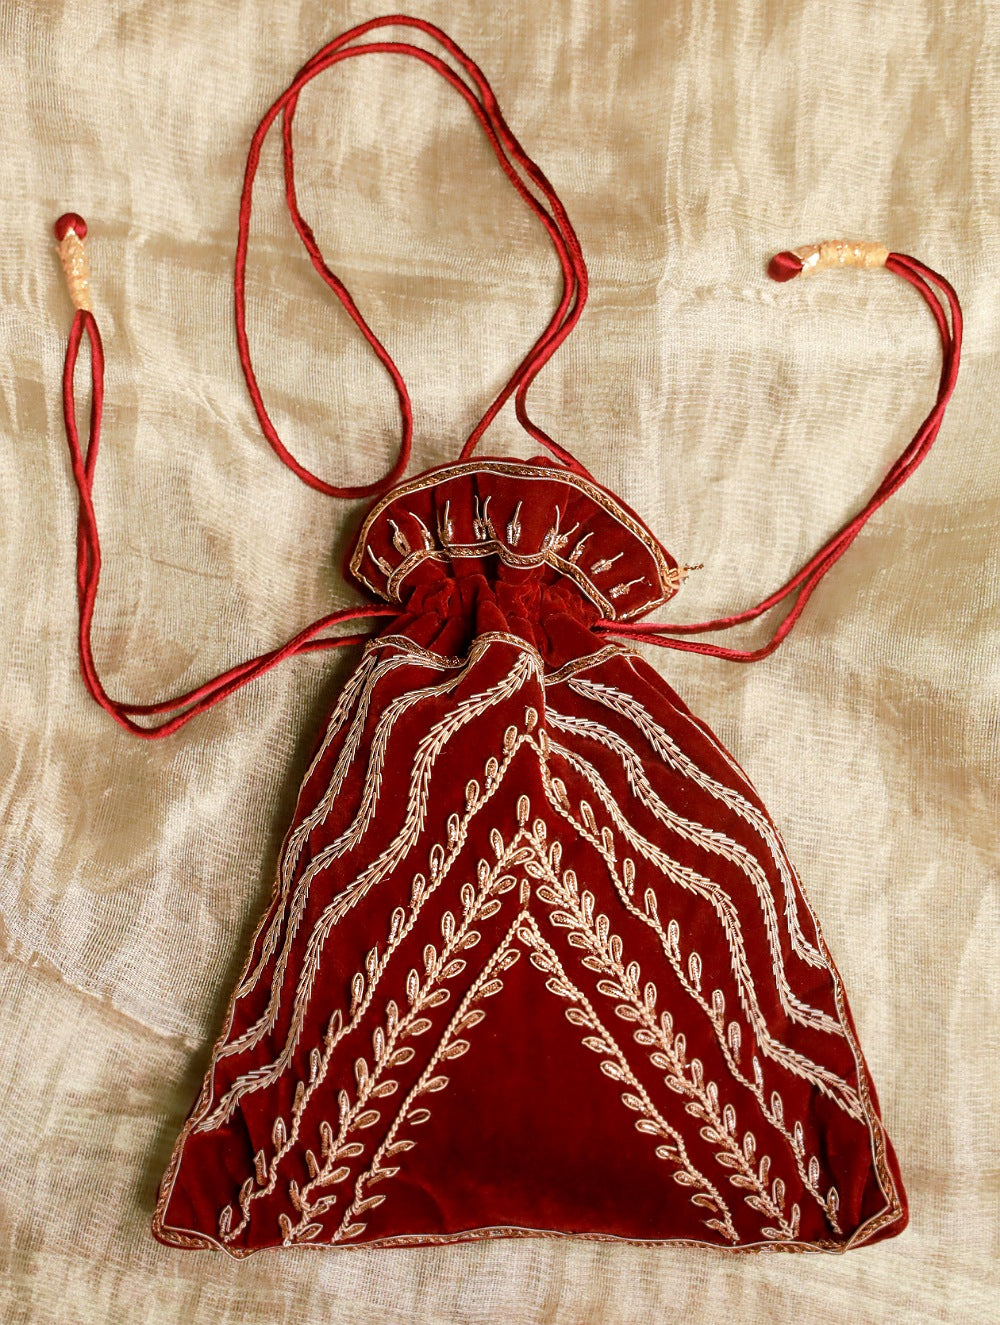 Load image into Gallery viewer, Zardozi and Resham Embroidered Evening Potli Bag - Maroon Ornate